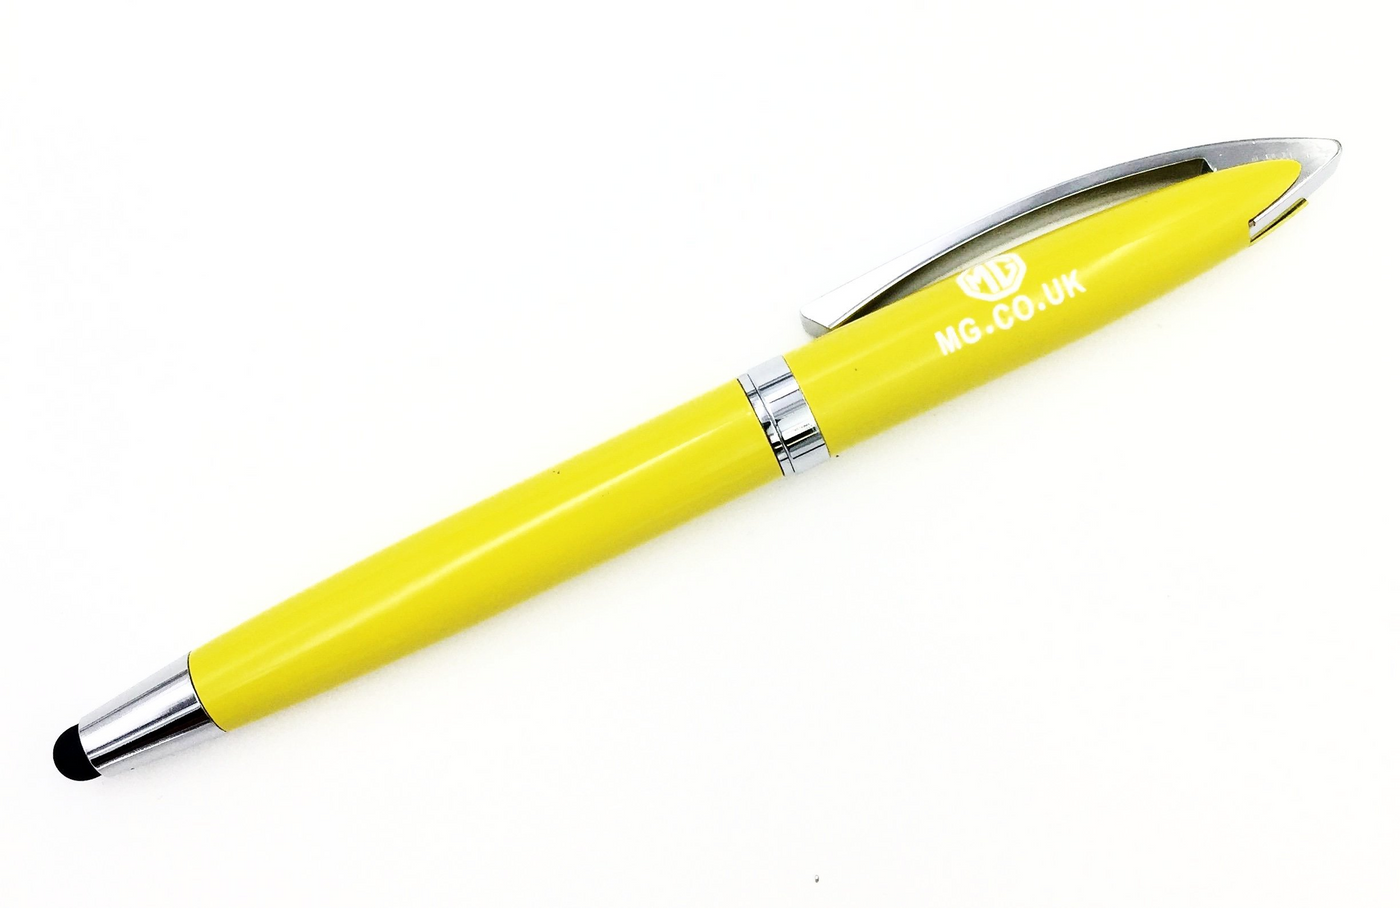 MG Metal Ball Point Pen with Touchscreen Stylus